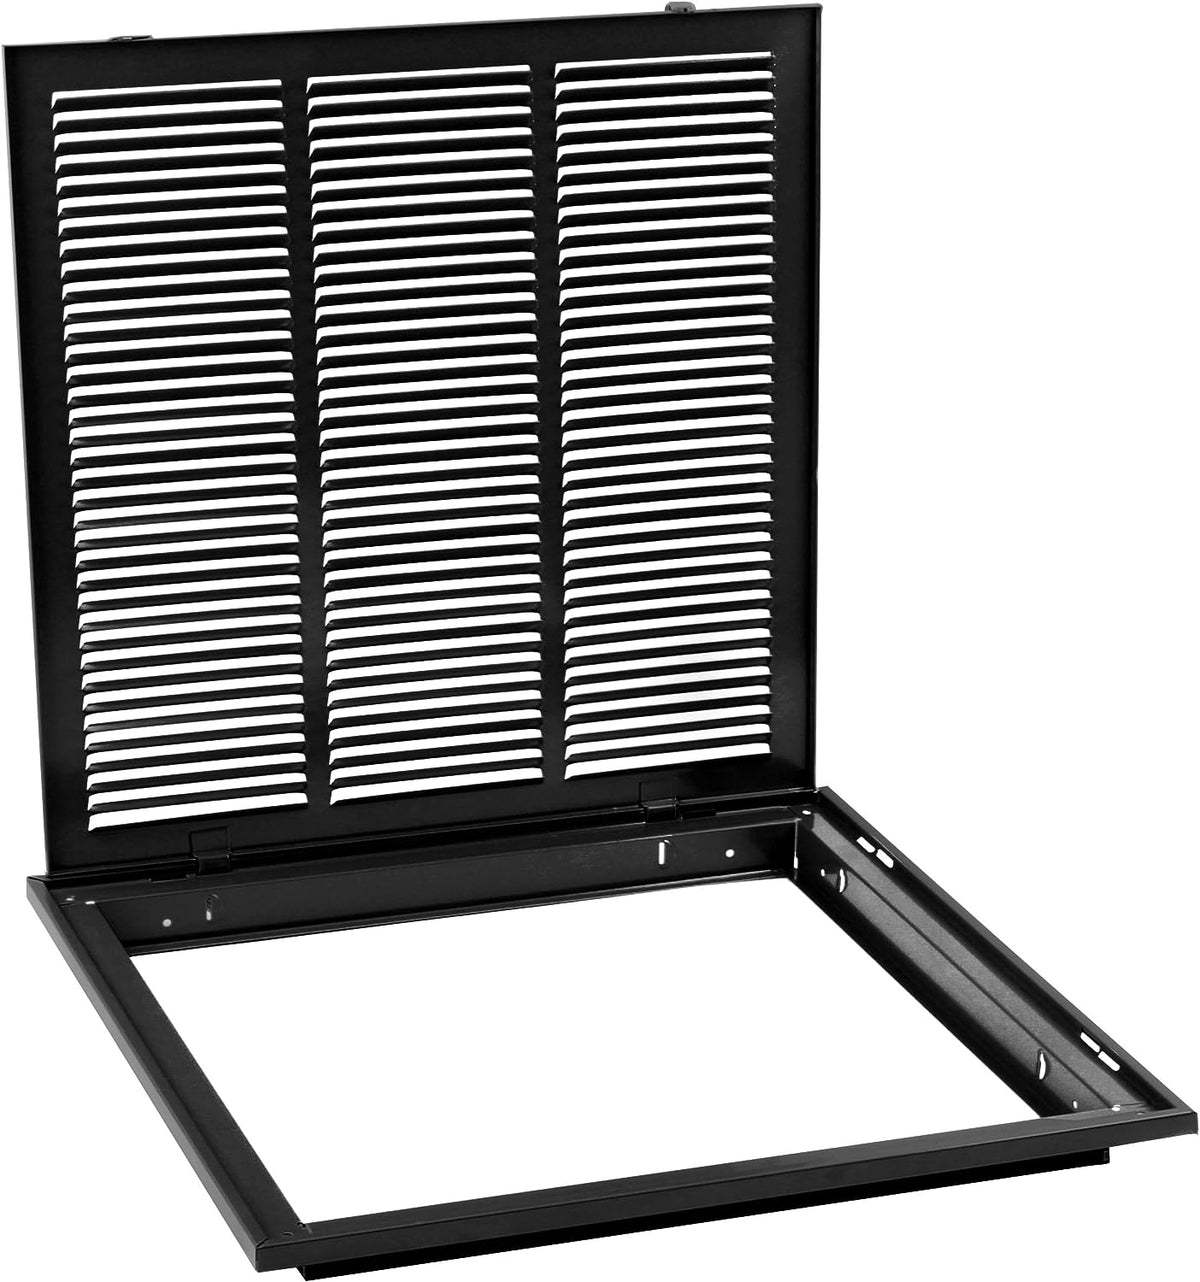 24&quot; X 30&quot; Steel Return Air Filter Grille for 1&quot; Filter - Removable Frame - Black - [Outer Dimensions: 26 5/8&quot; X 32 5/8&quot;]